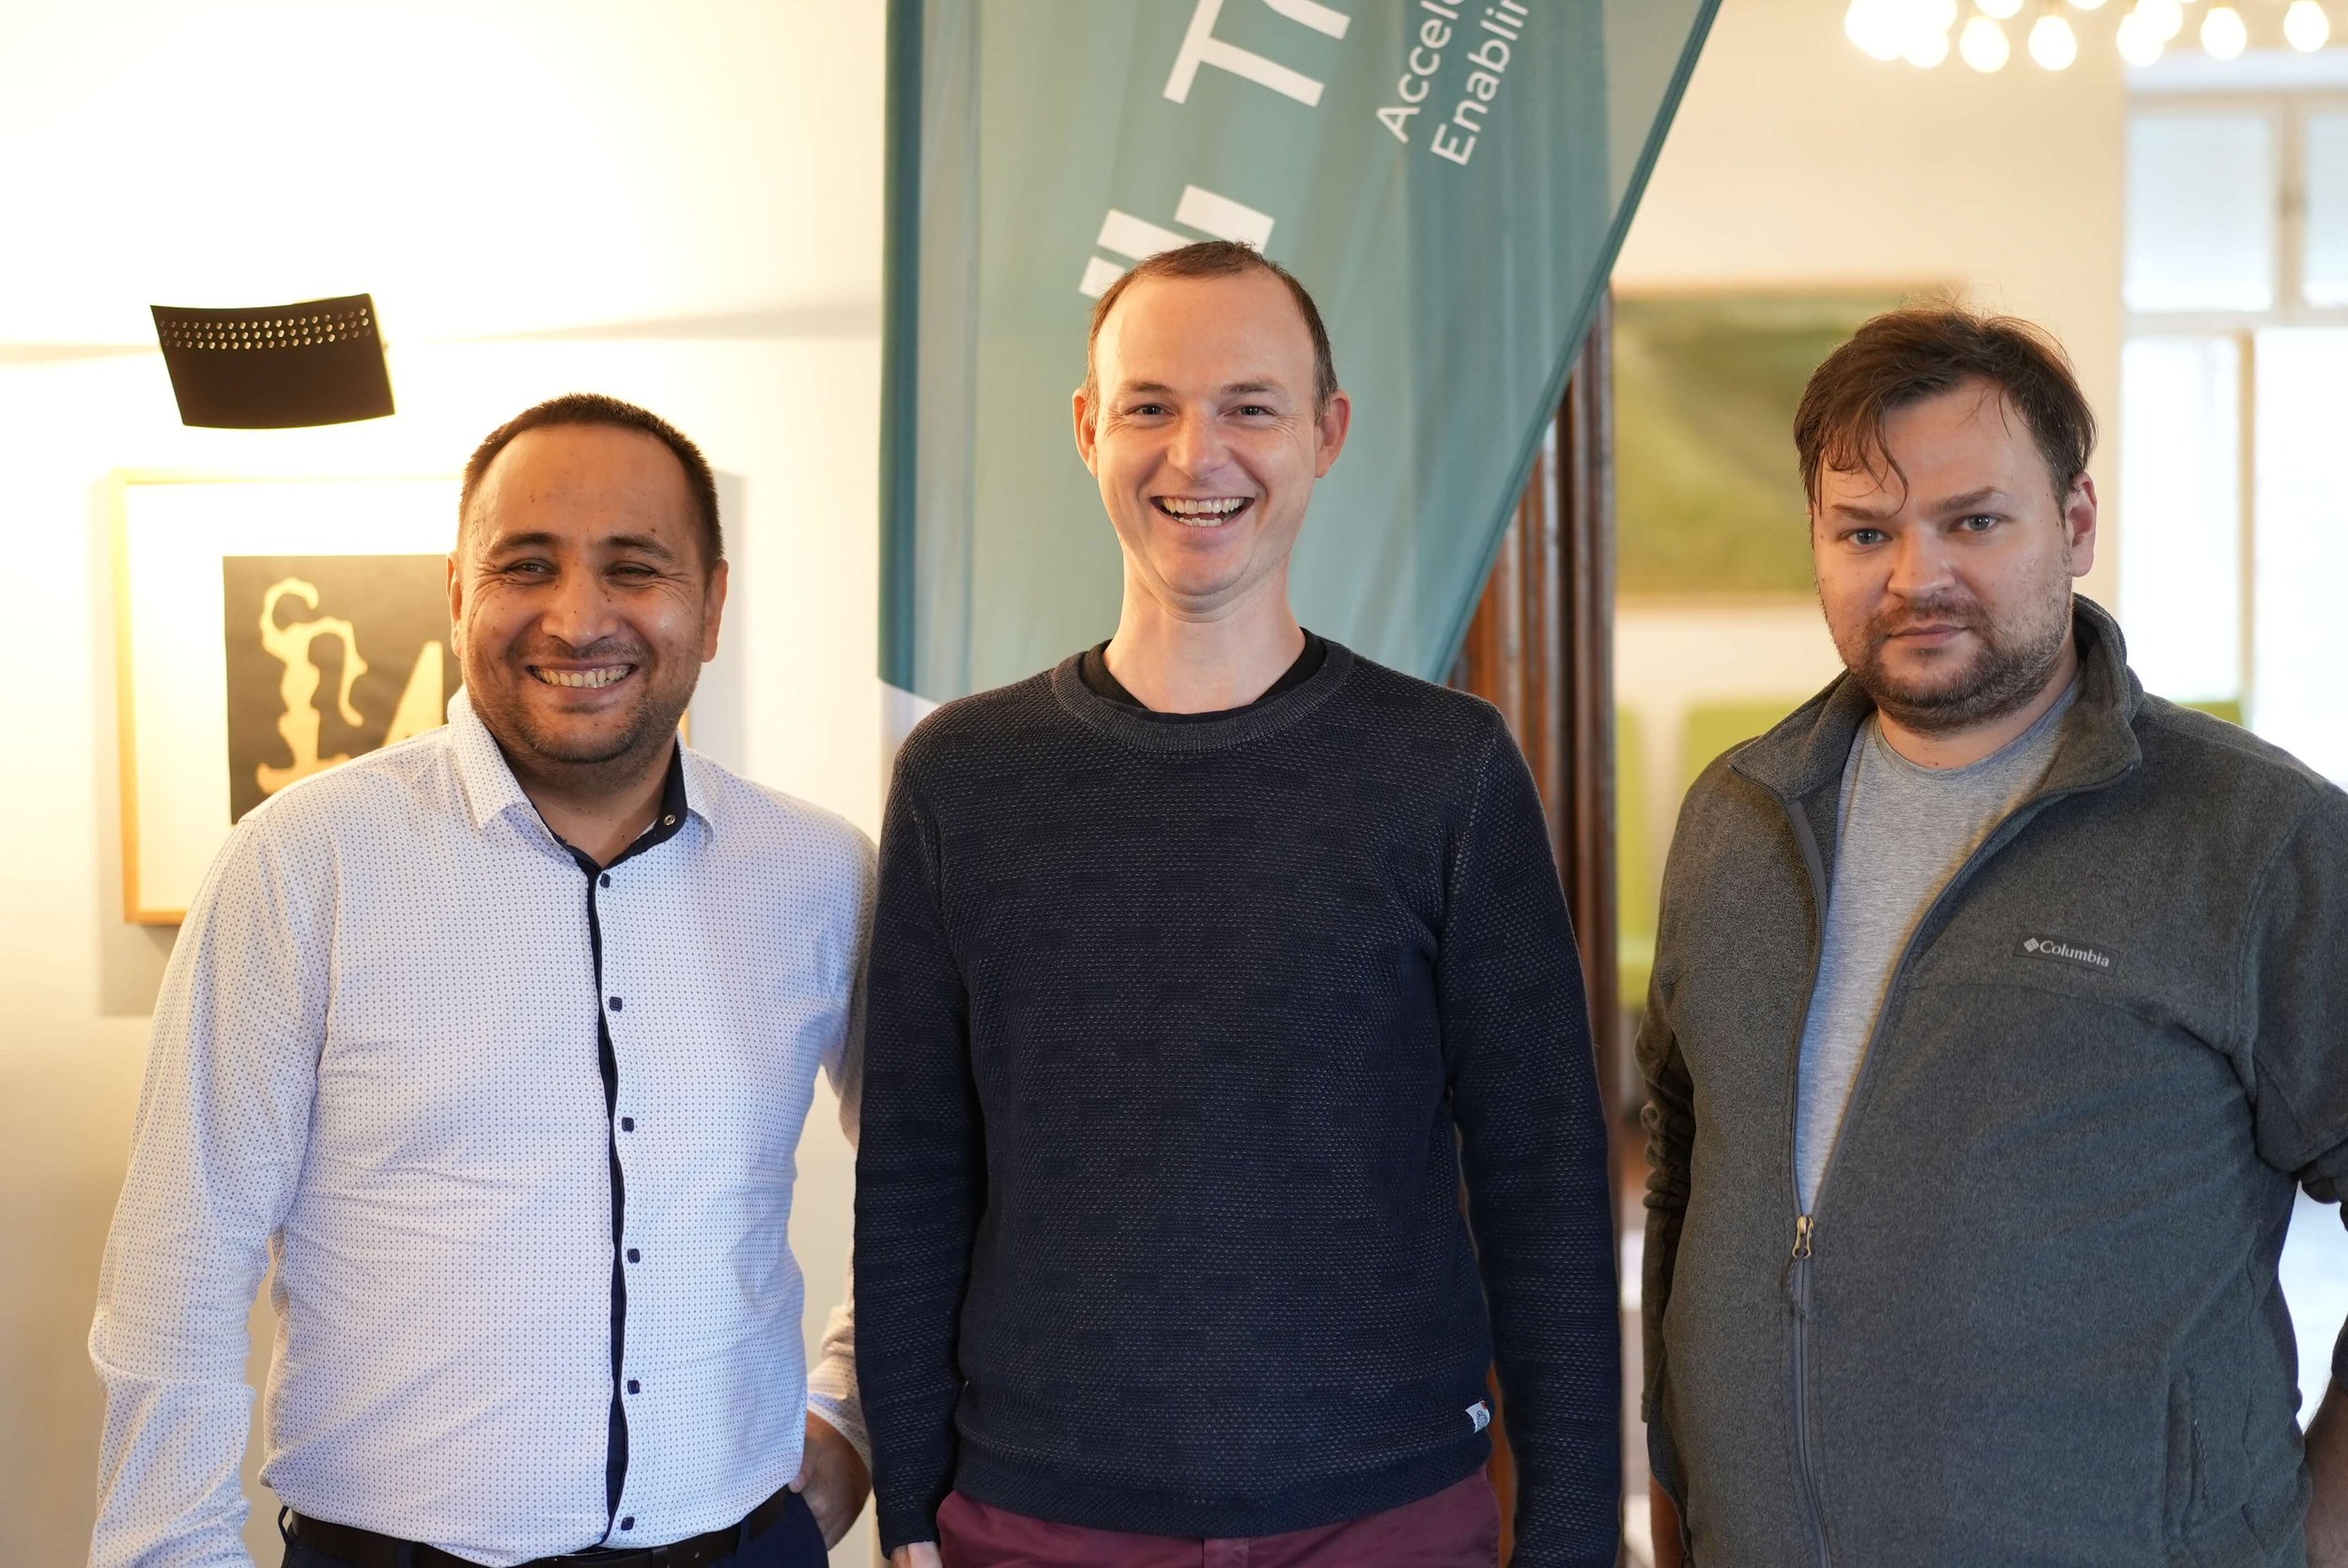 Trustbit CEO Jörg smiling at the camera with Aigiz and Sergey